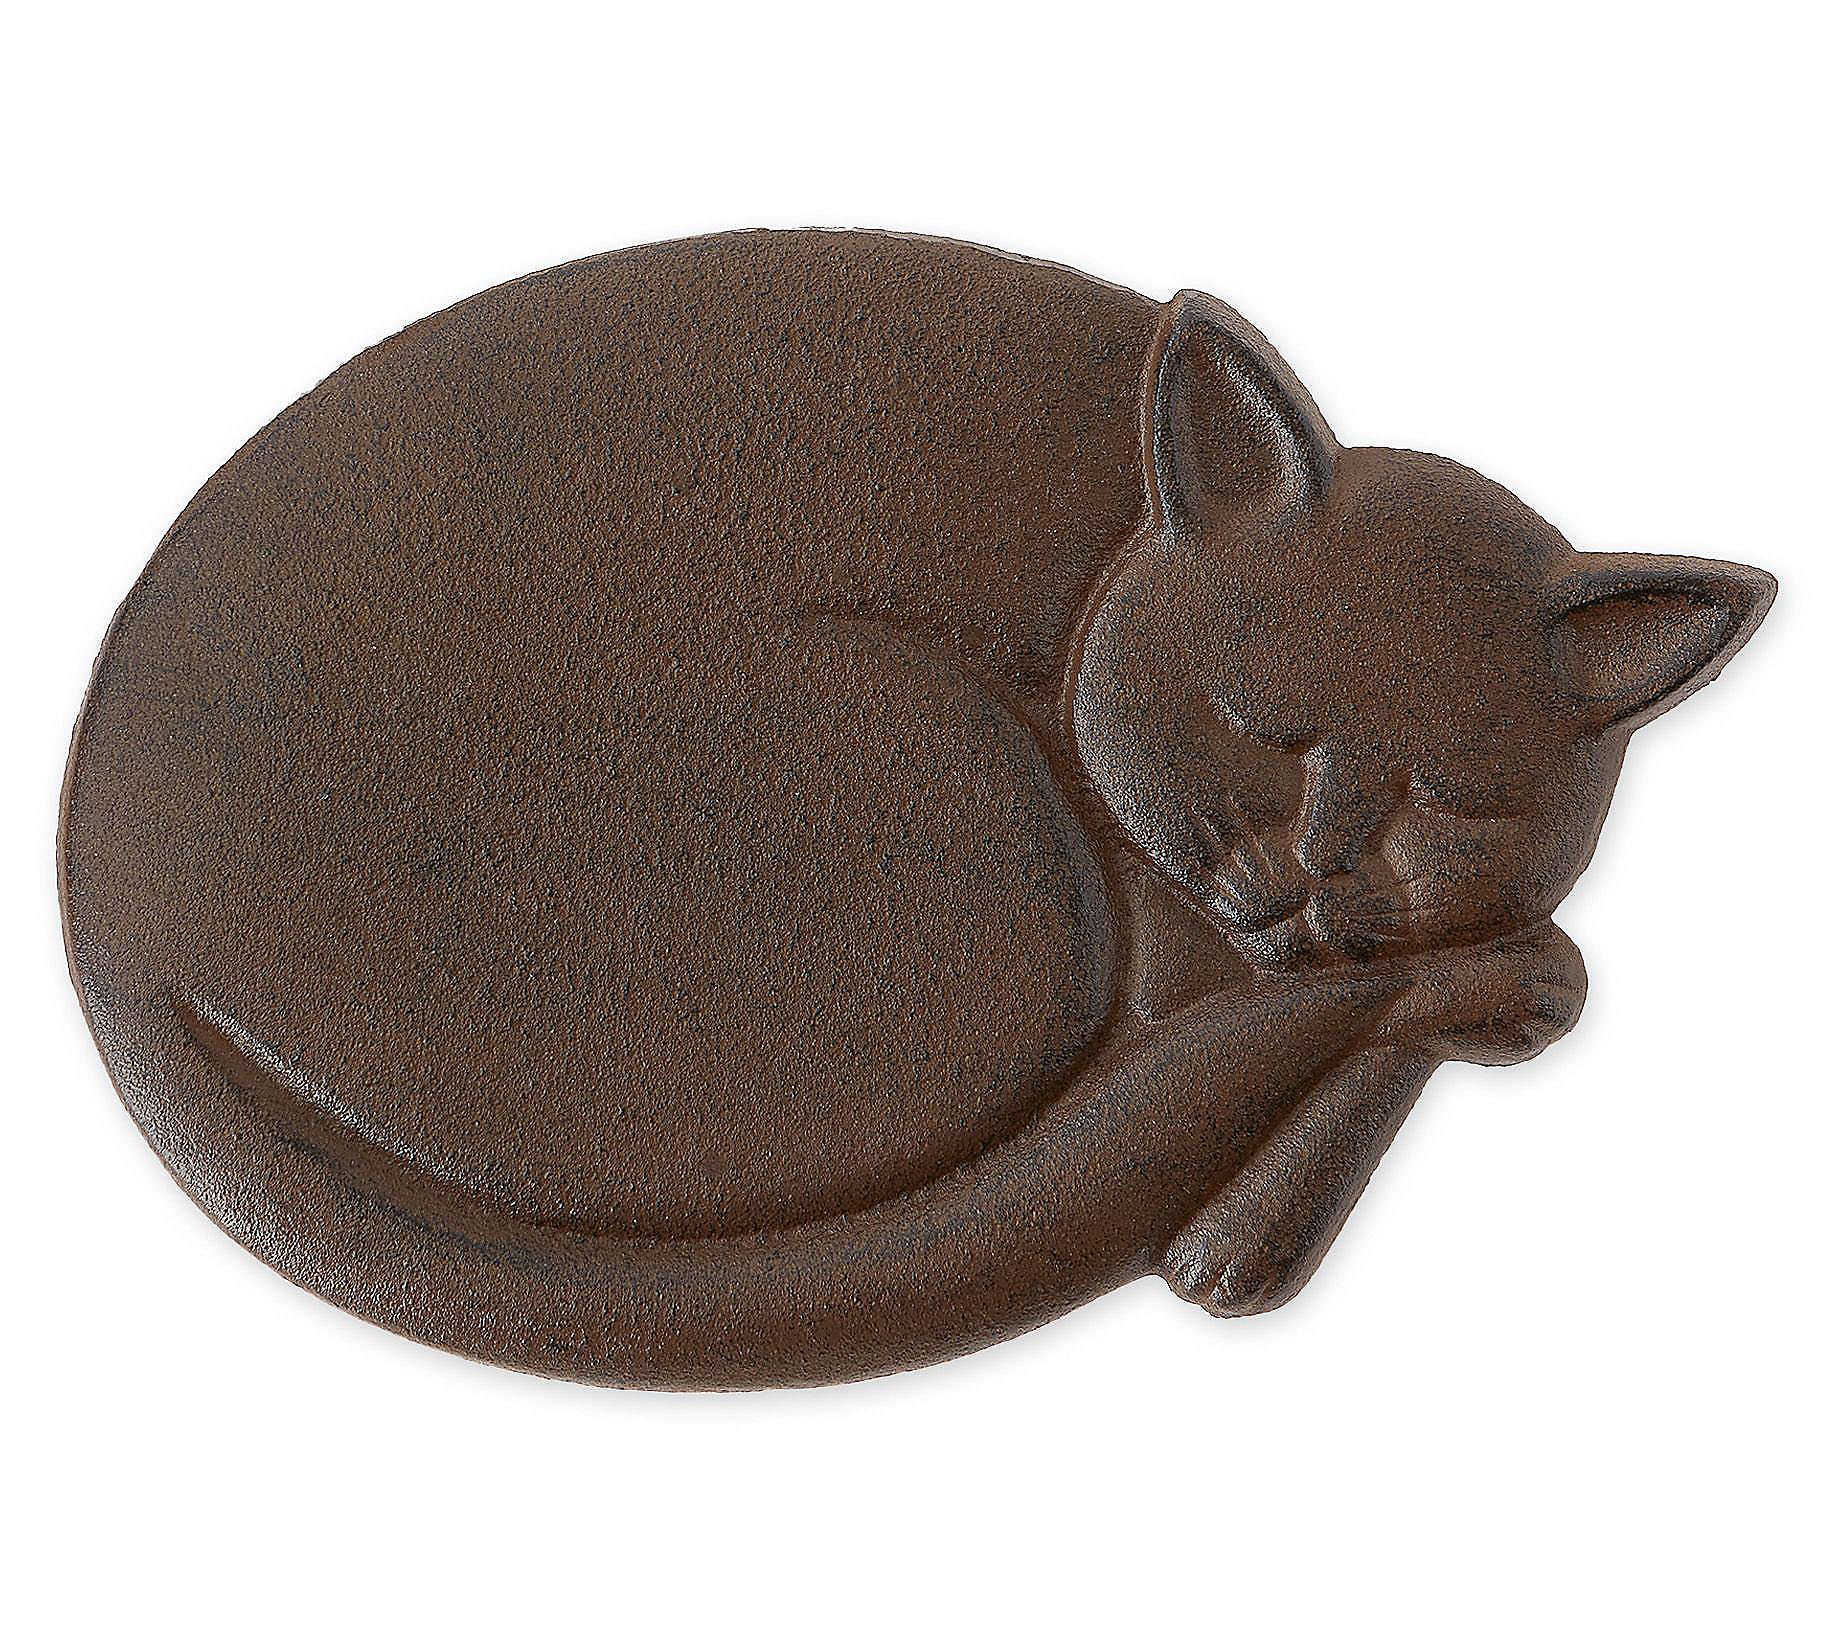 Zingz and Thingz Sleeping Curled Cat Stepping Stone